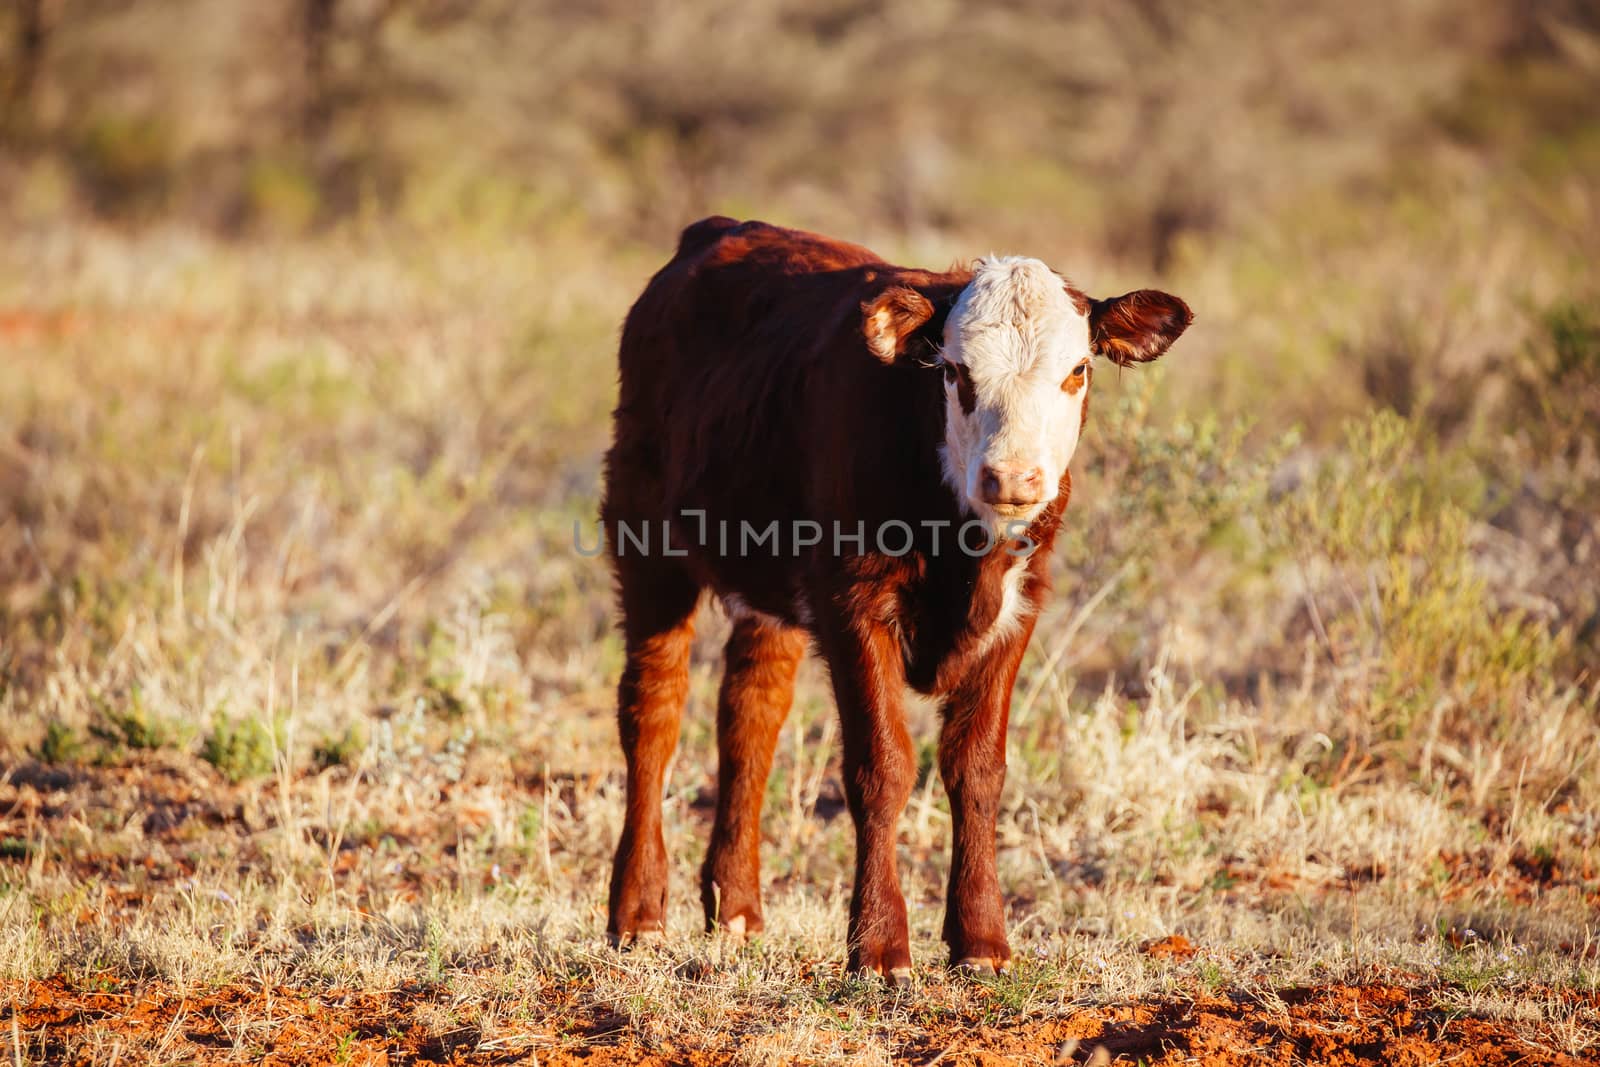 Grazing Cows in the Australian Outback by FiledIMAGE